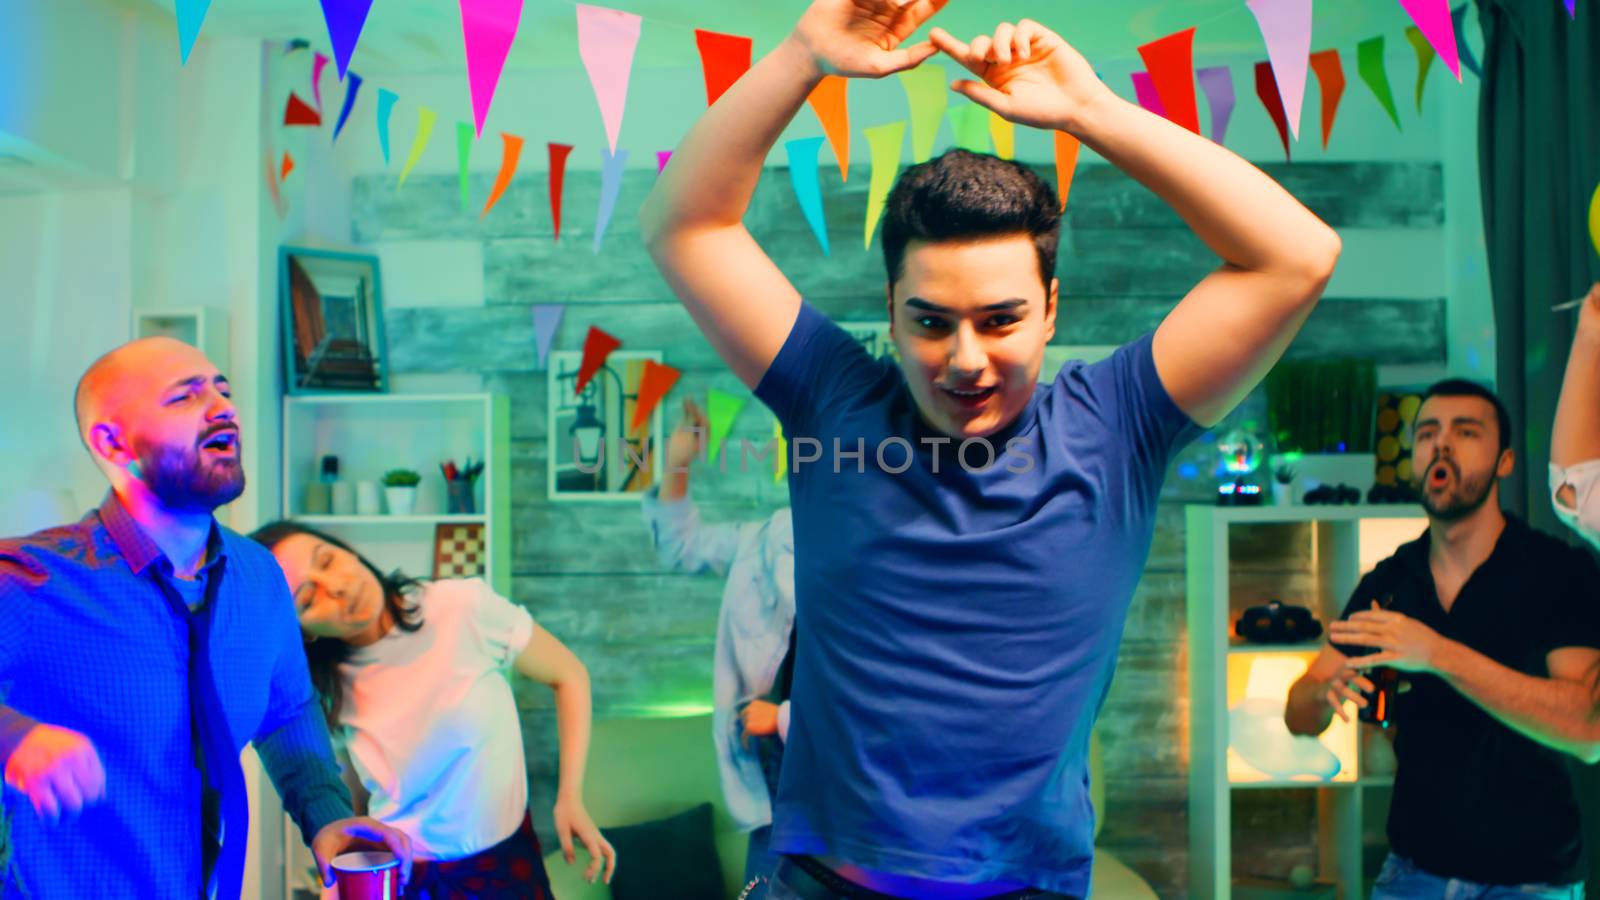 Cheerful young man dancing with his hands up by DCStudio